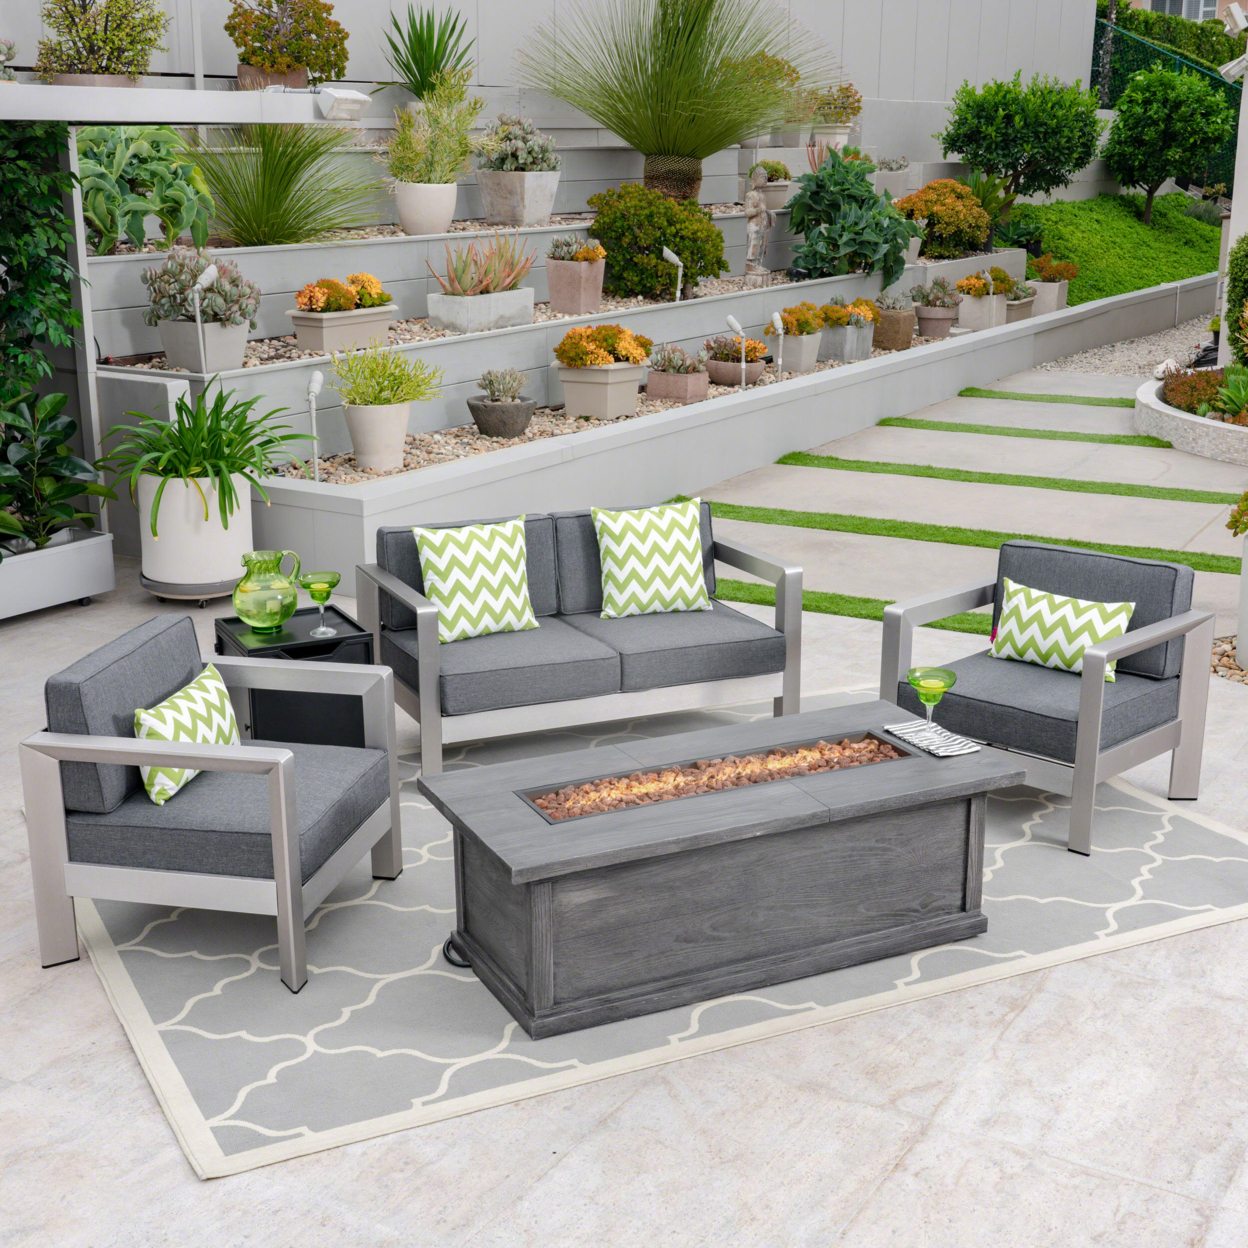 Mike Outdoor 4-Seater Aluminum Chat Set With Fire Pit And Tank Holder - Silver + Gray + Gray + Black